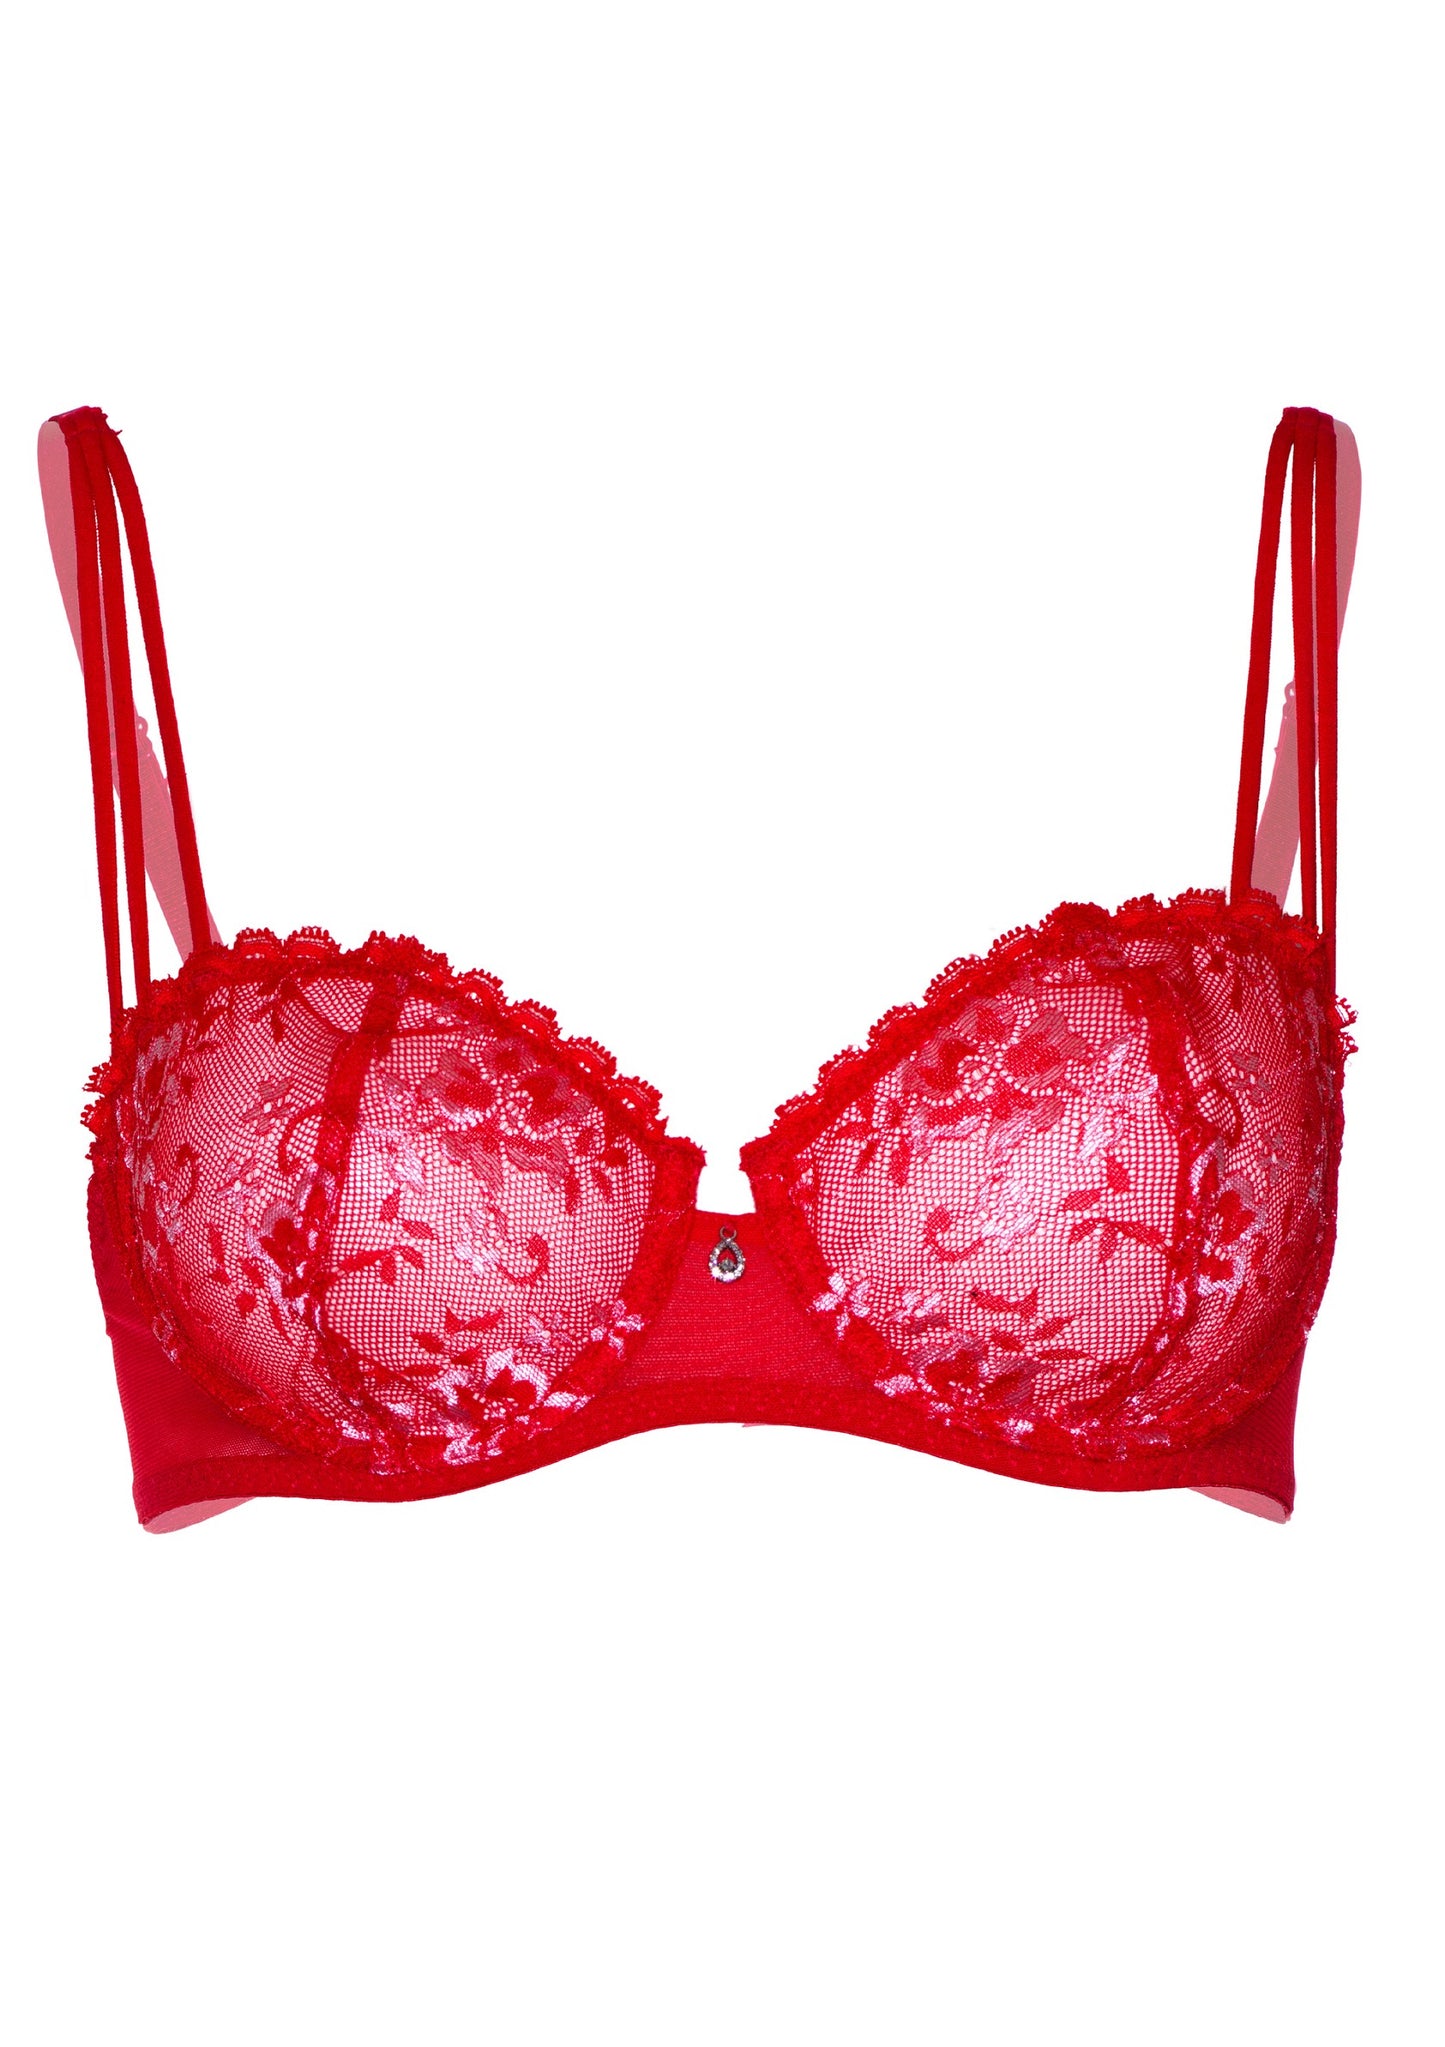 Daring Intimates Mix & Match Very sexy unlined lace bra RED 75B - 3